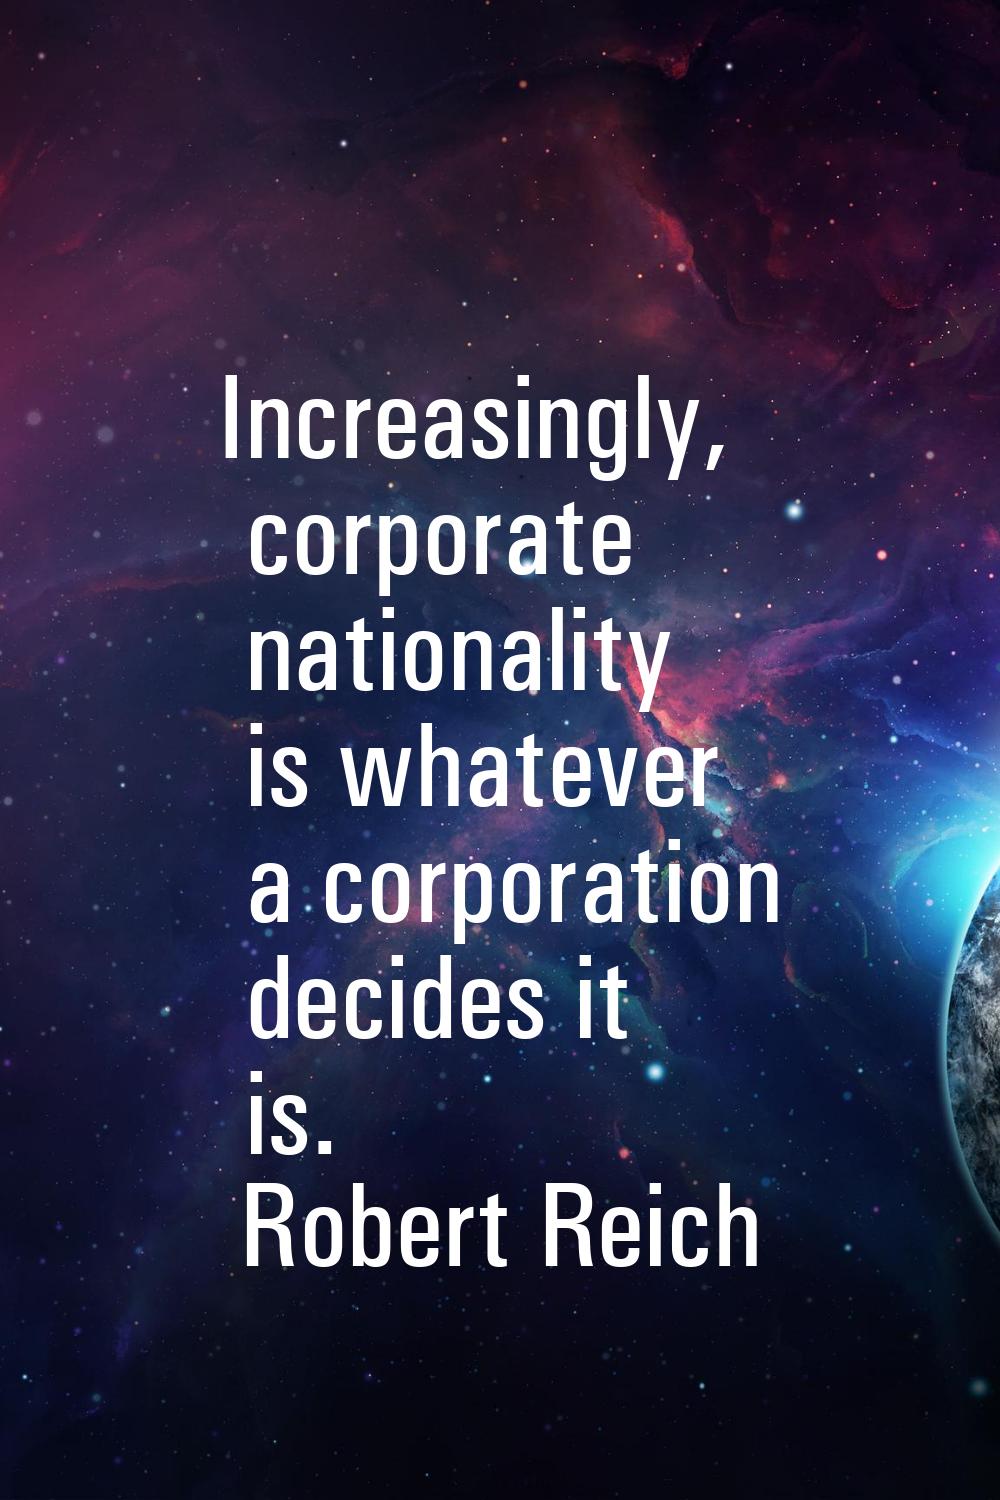 Increasingly, corporate nationality is whatever a corporation decides it is.